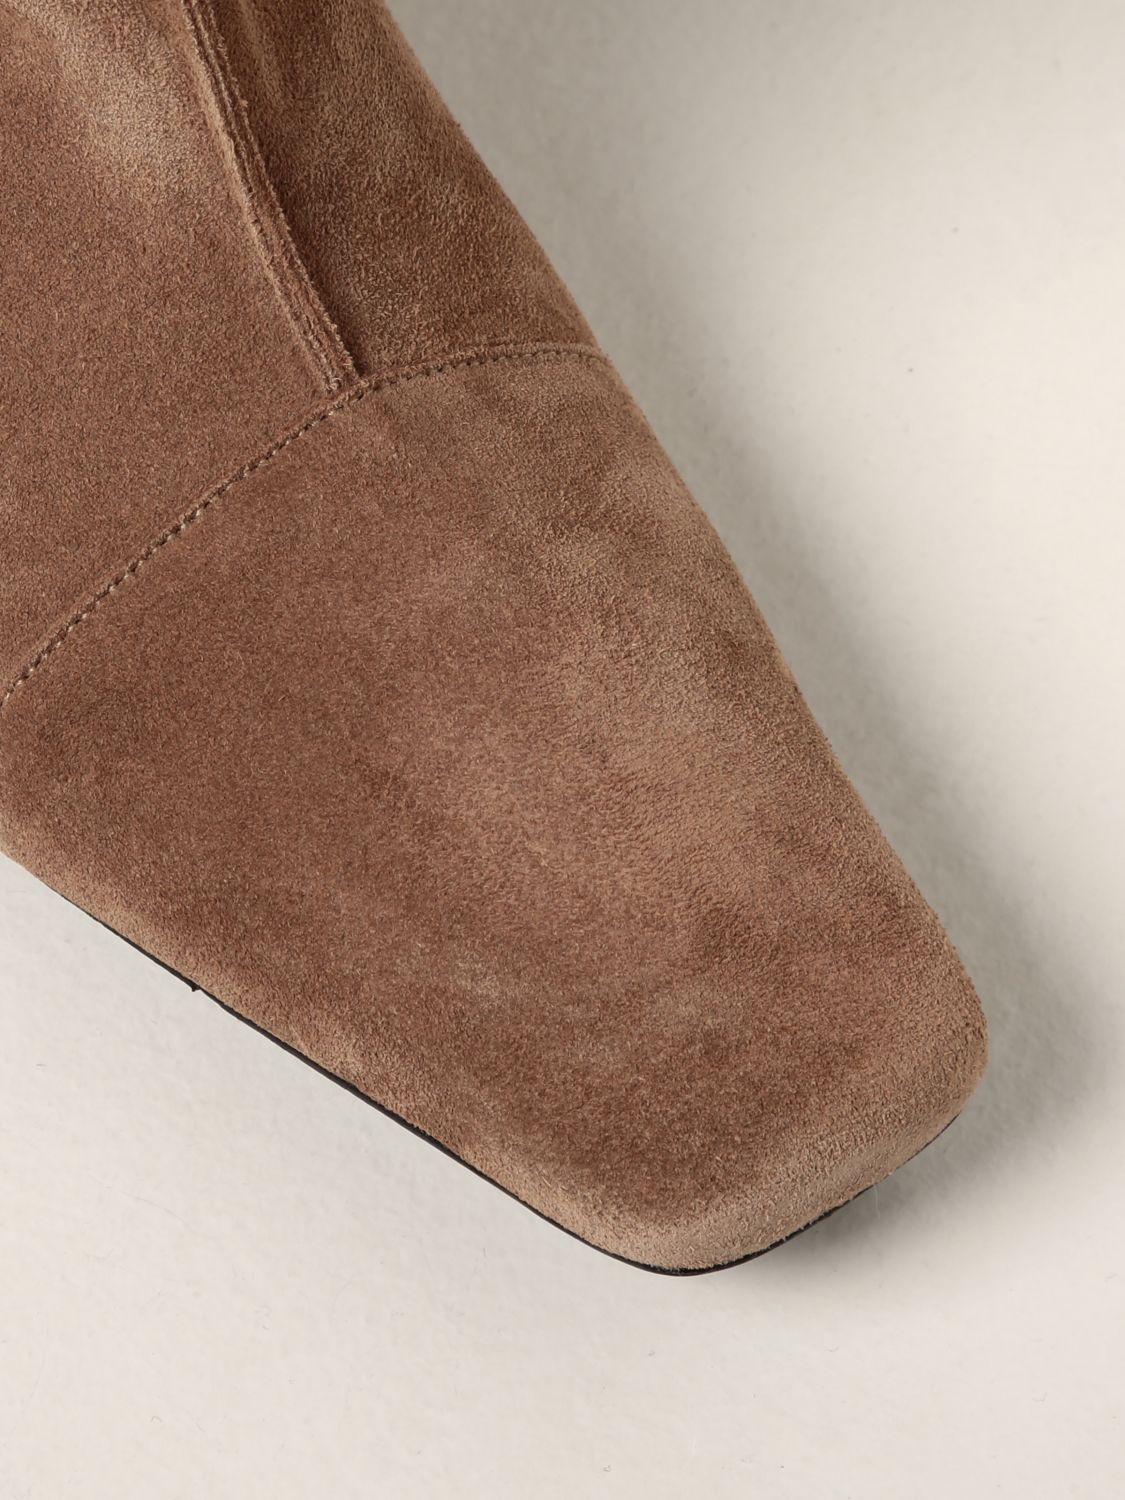 Boots By Far: By Far boot in suede brown 4